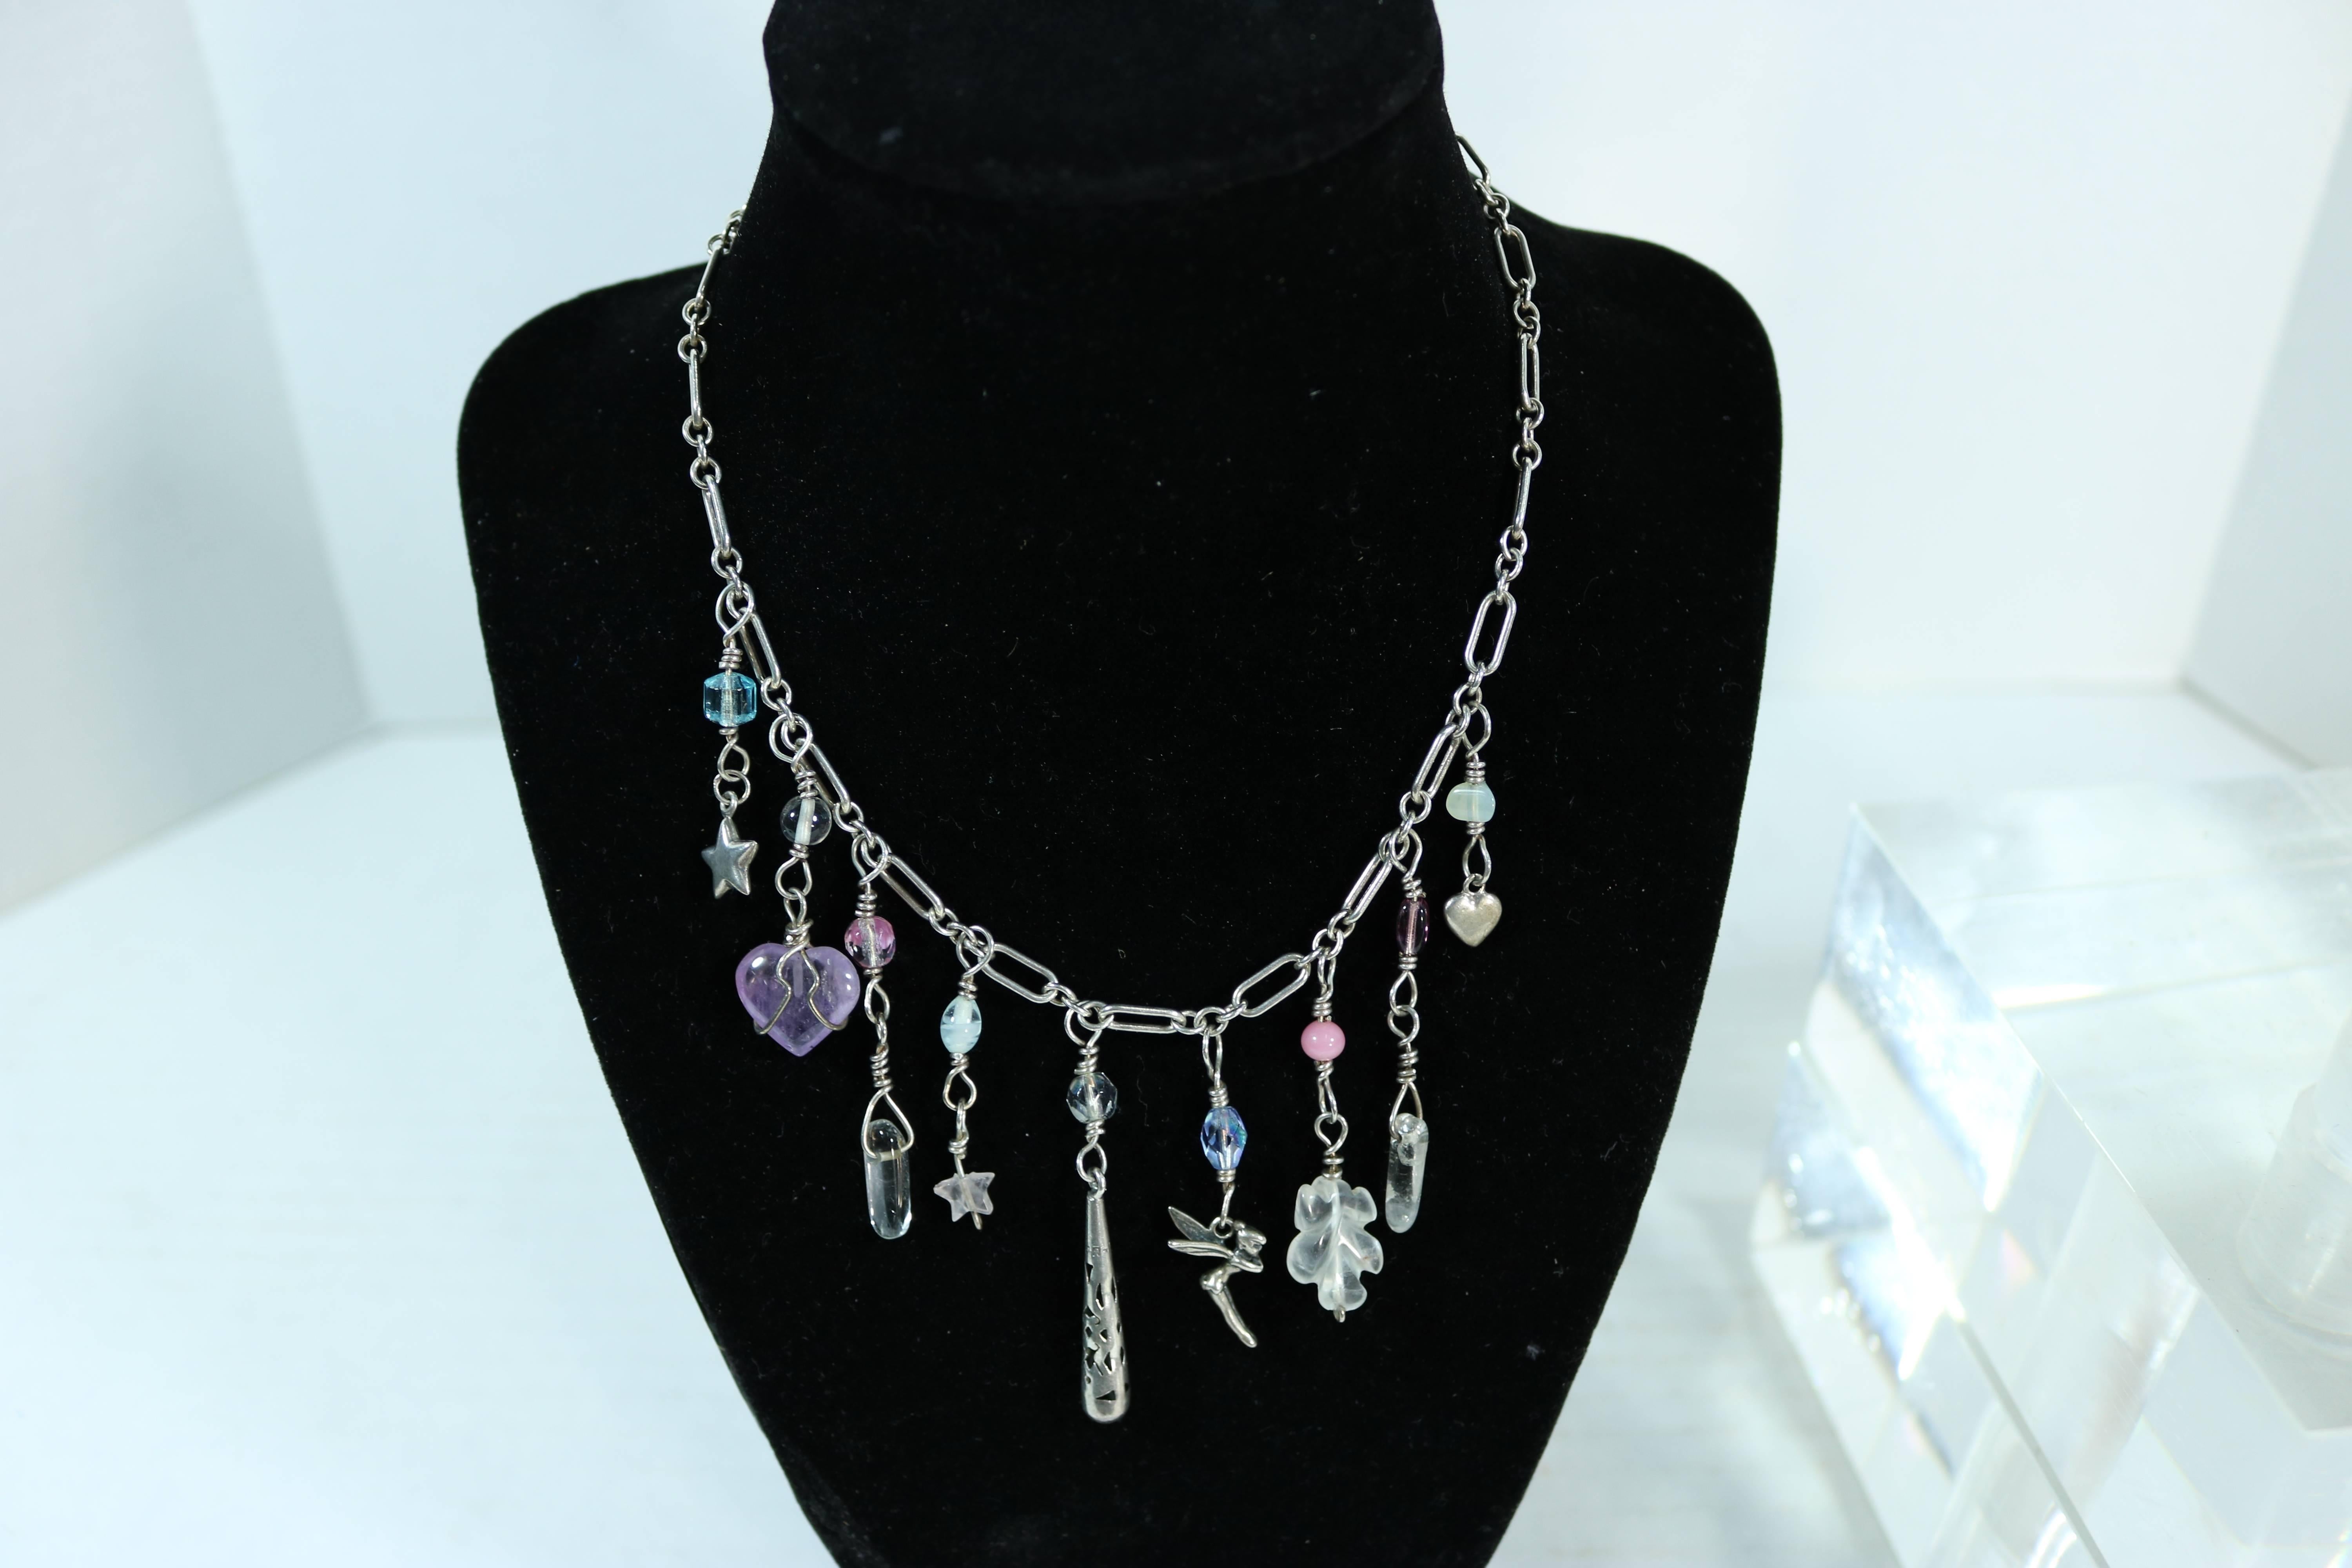 A beautifully fabricated most ‘Charming’ necklace and bracelet with fairies, amethyst hearts, teddy bear, amulets, crystals, stars dangling from a sterling silver neck chain and a sterling bangle bracelet.
Bracelet marked 925, TS-30 necklace marked